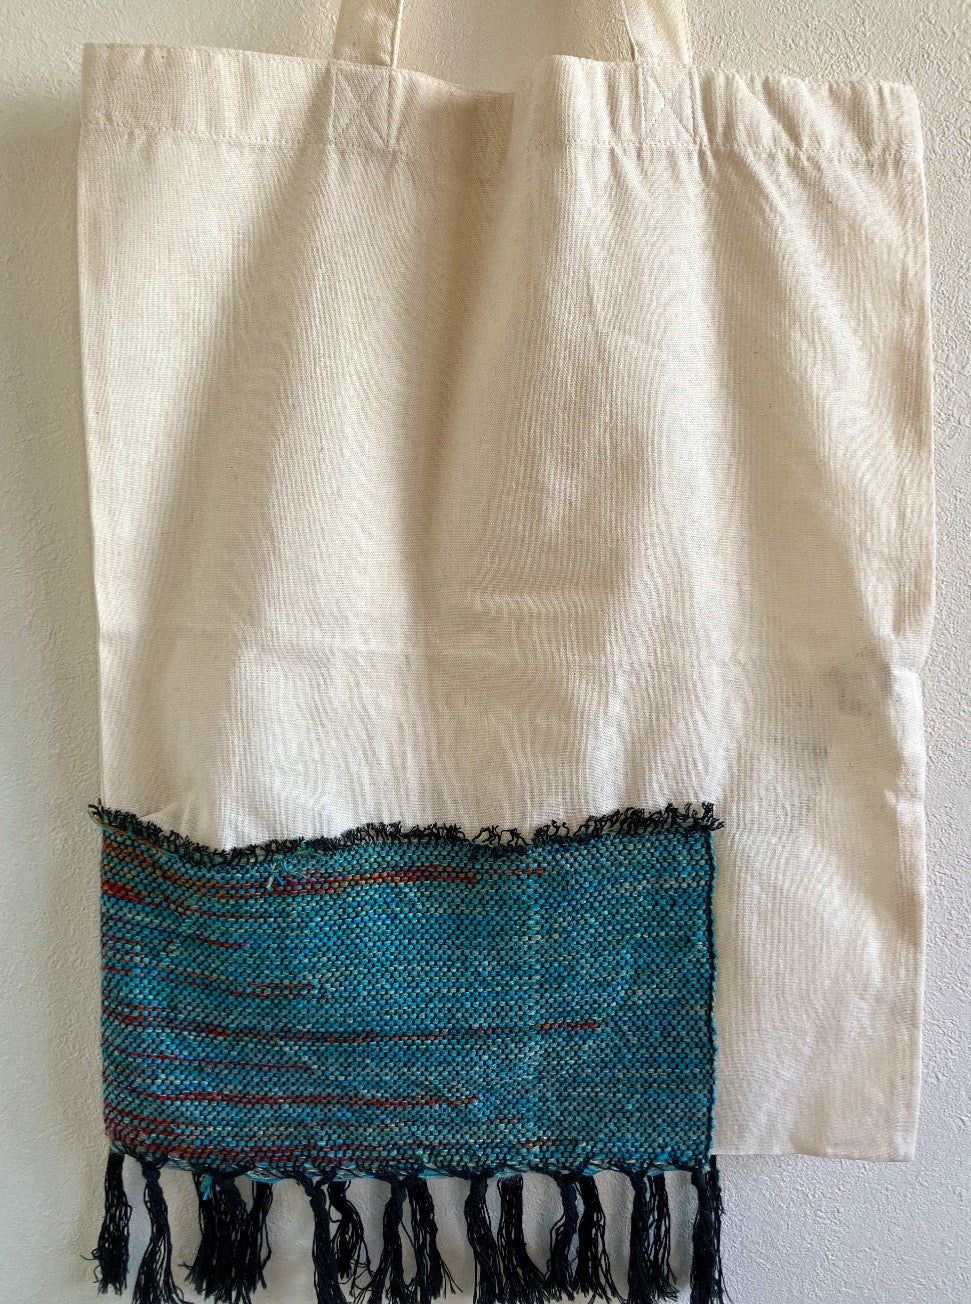 Beige cotton bag embellished with wide strip of blue-green and red cotton